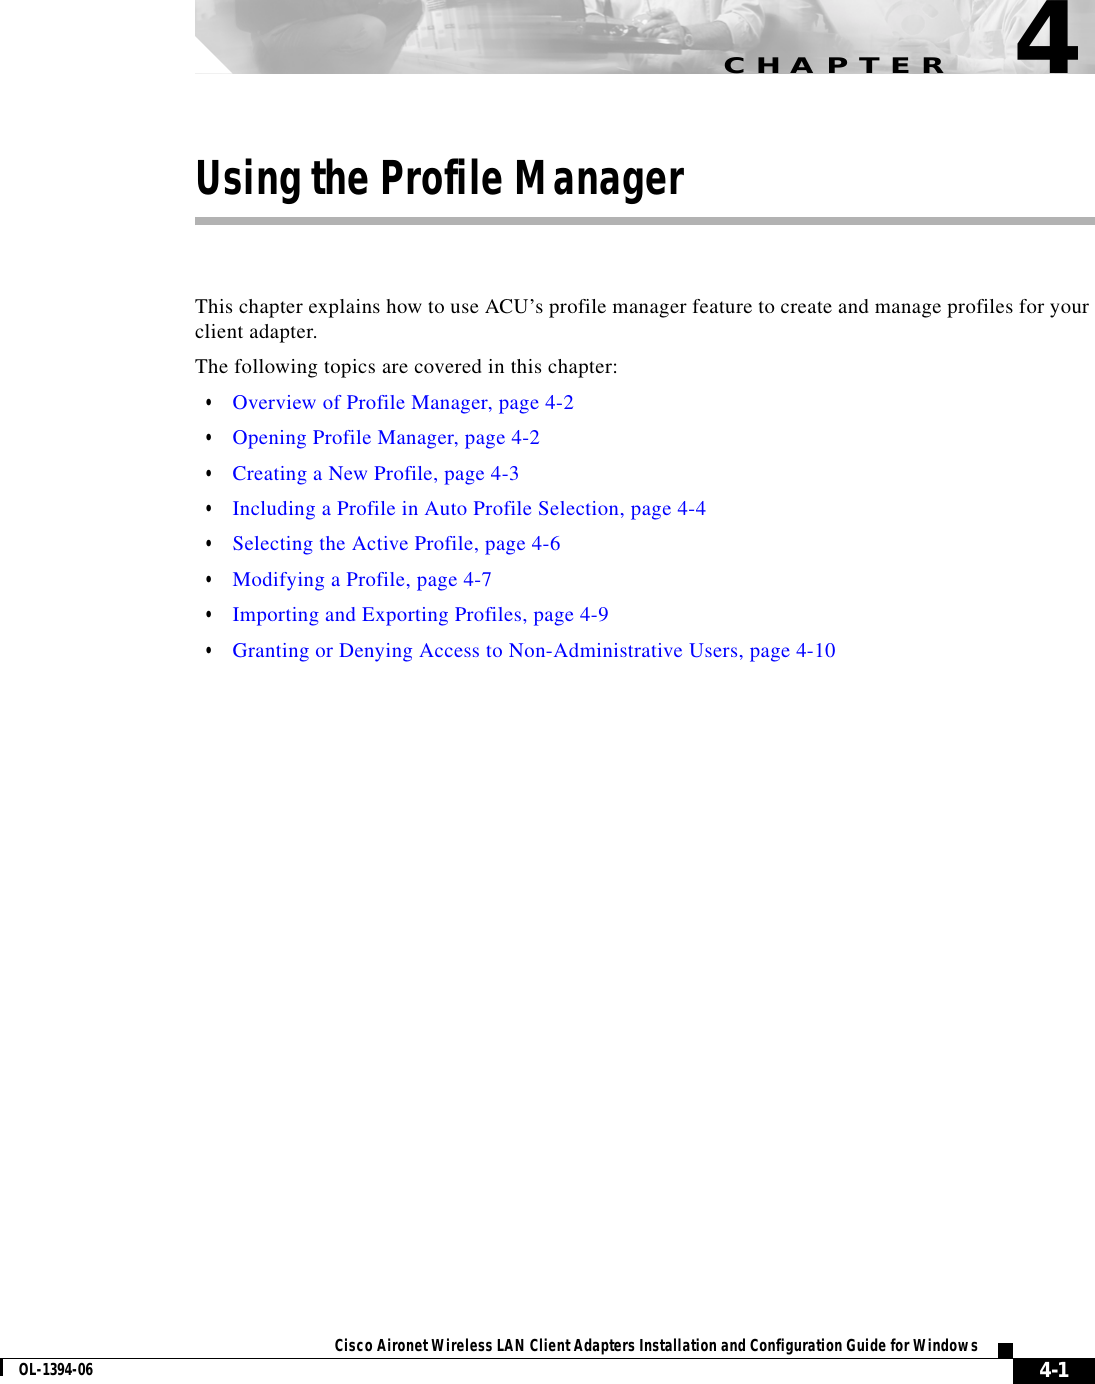 CHAPTER4-1Cisco Aironet Wireless LAN Client Adapters Installation and Configuration Guide for WindowsOL-1394-064Using the Profile ManagerThis chapter explains how to use ACU’s profile manager feature to create and manage profiles for your client adapter.The following topics are covered in this chapter:•Overview of Profile Manager, page 4-2•Opening Profile Manager, page 4-2•Creating a New Profile, page 4-3•Including a Profile in Auto Profile Selection, page 4-4•Selecting the Active Profile, page 4-6•Modifying a Profile, page 4-7•Importing and Exporting Profiles, page 4-9•Granting or Denying Access to Non-Administrative Users, page 4-10